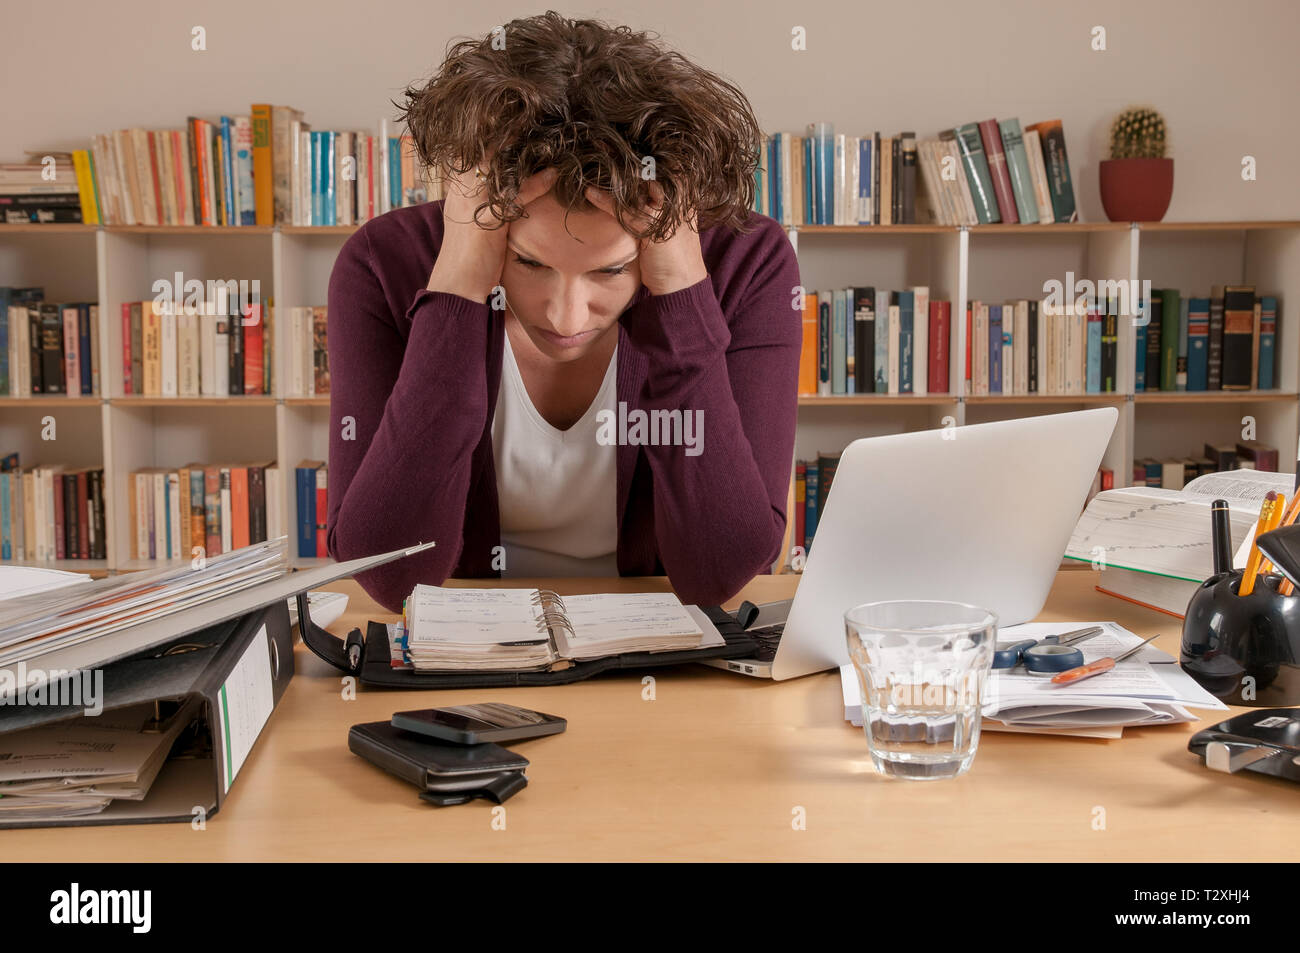 Stressed young woman working at home Stock Photo